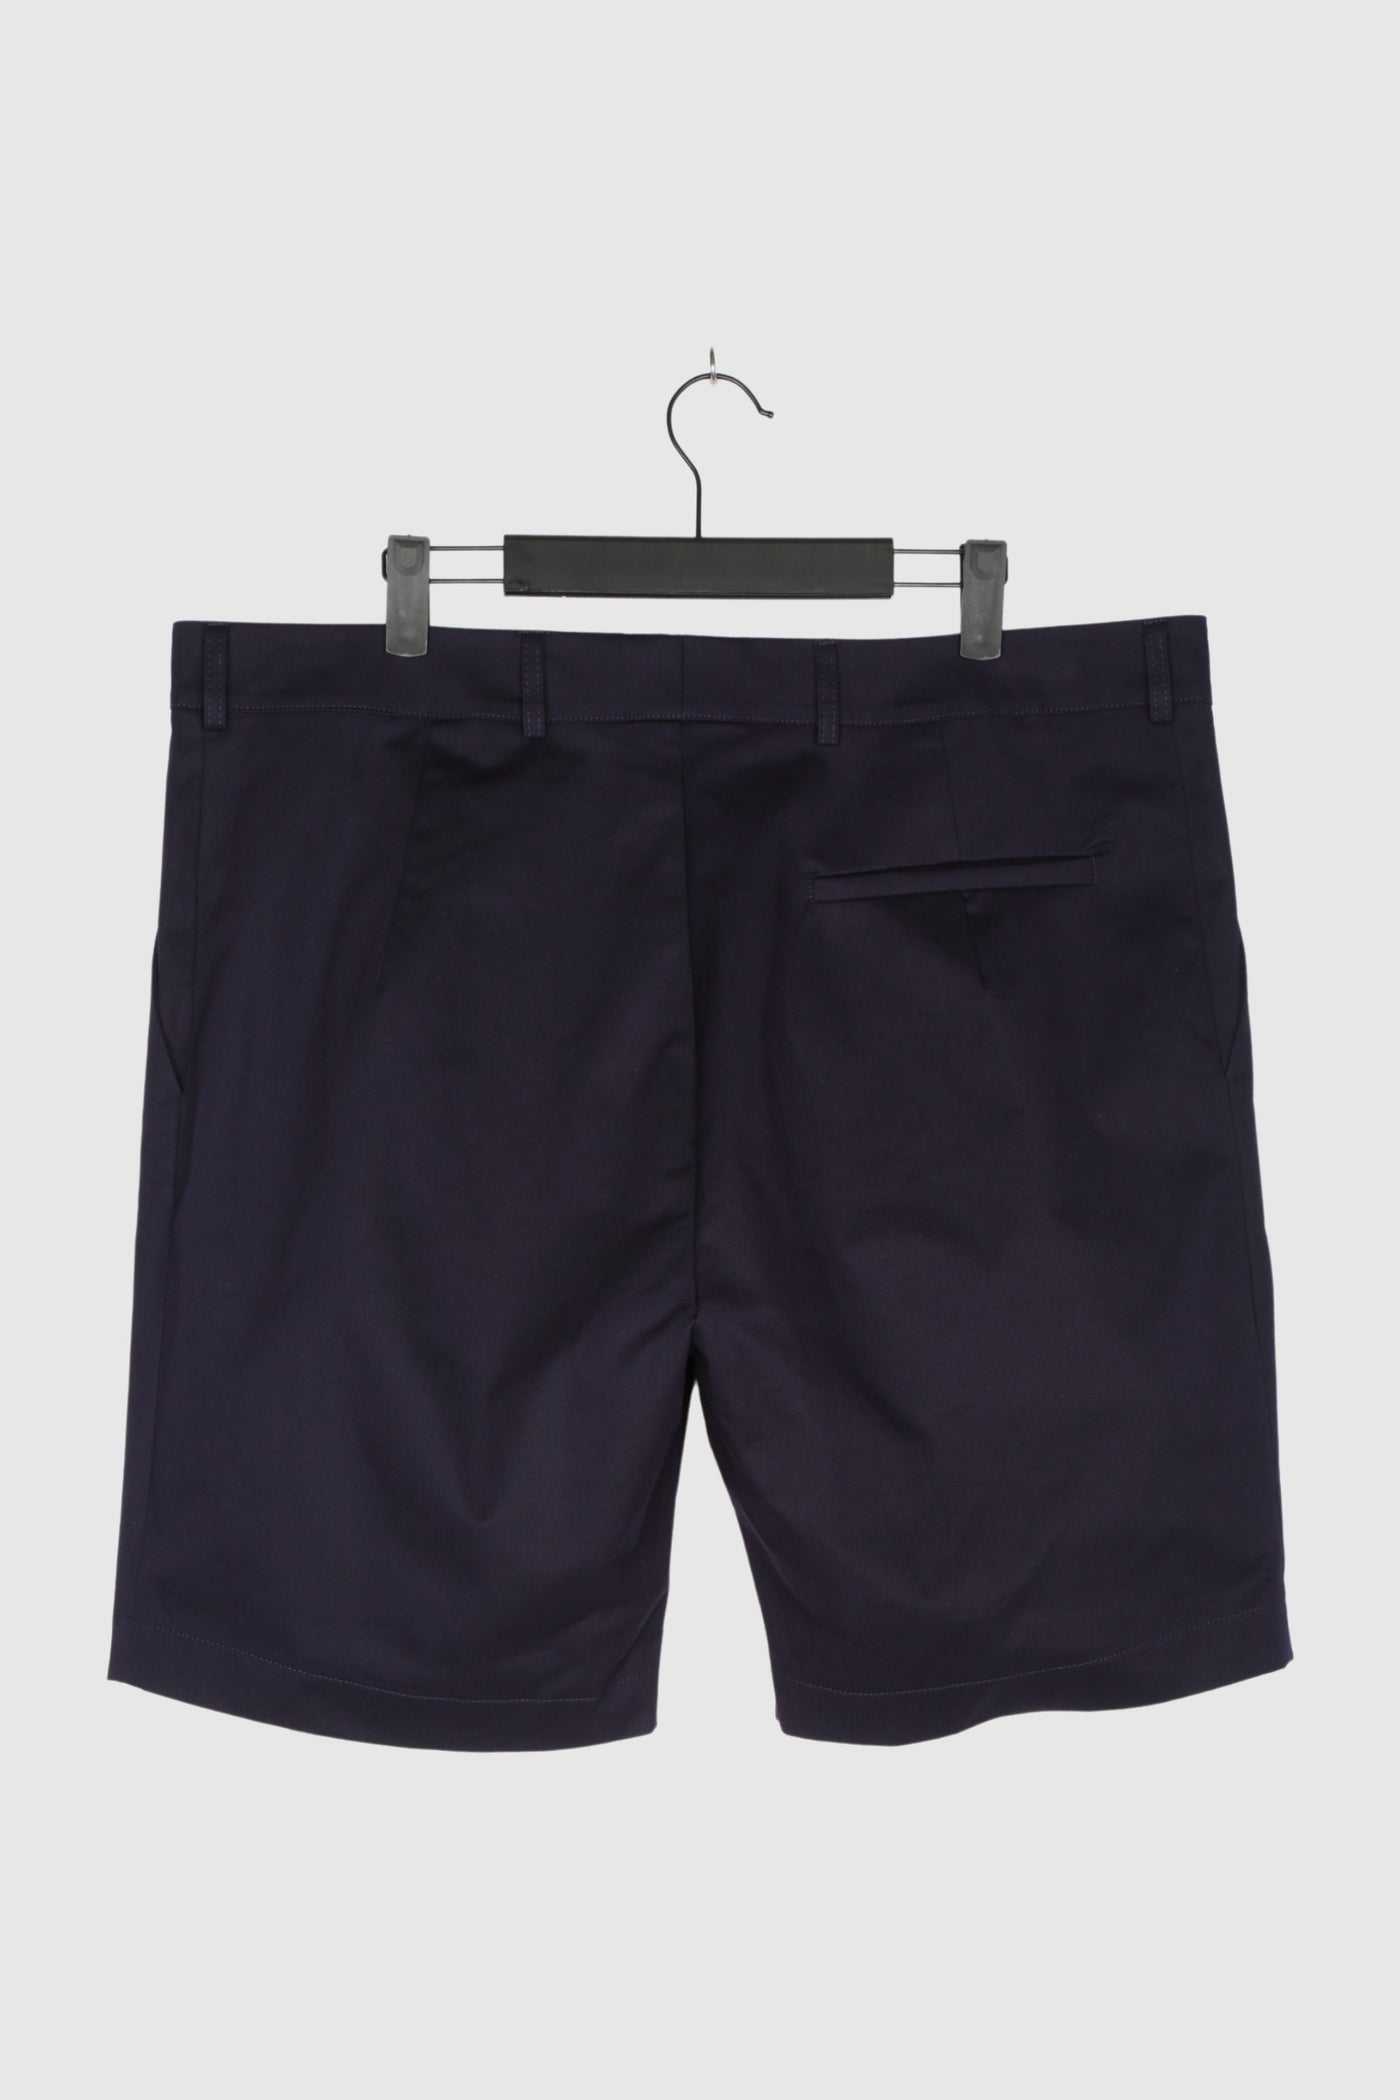 Private: SHORTS FIRENZE NAVY FOR MEN